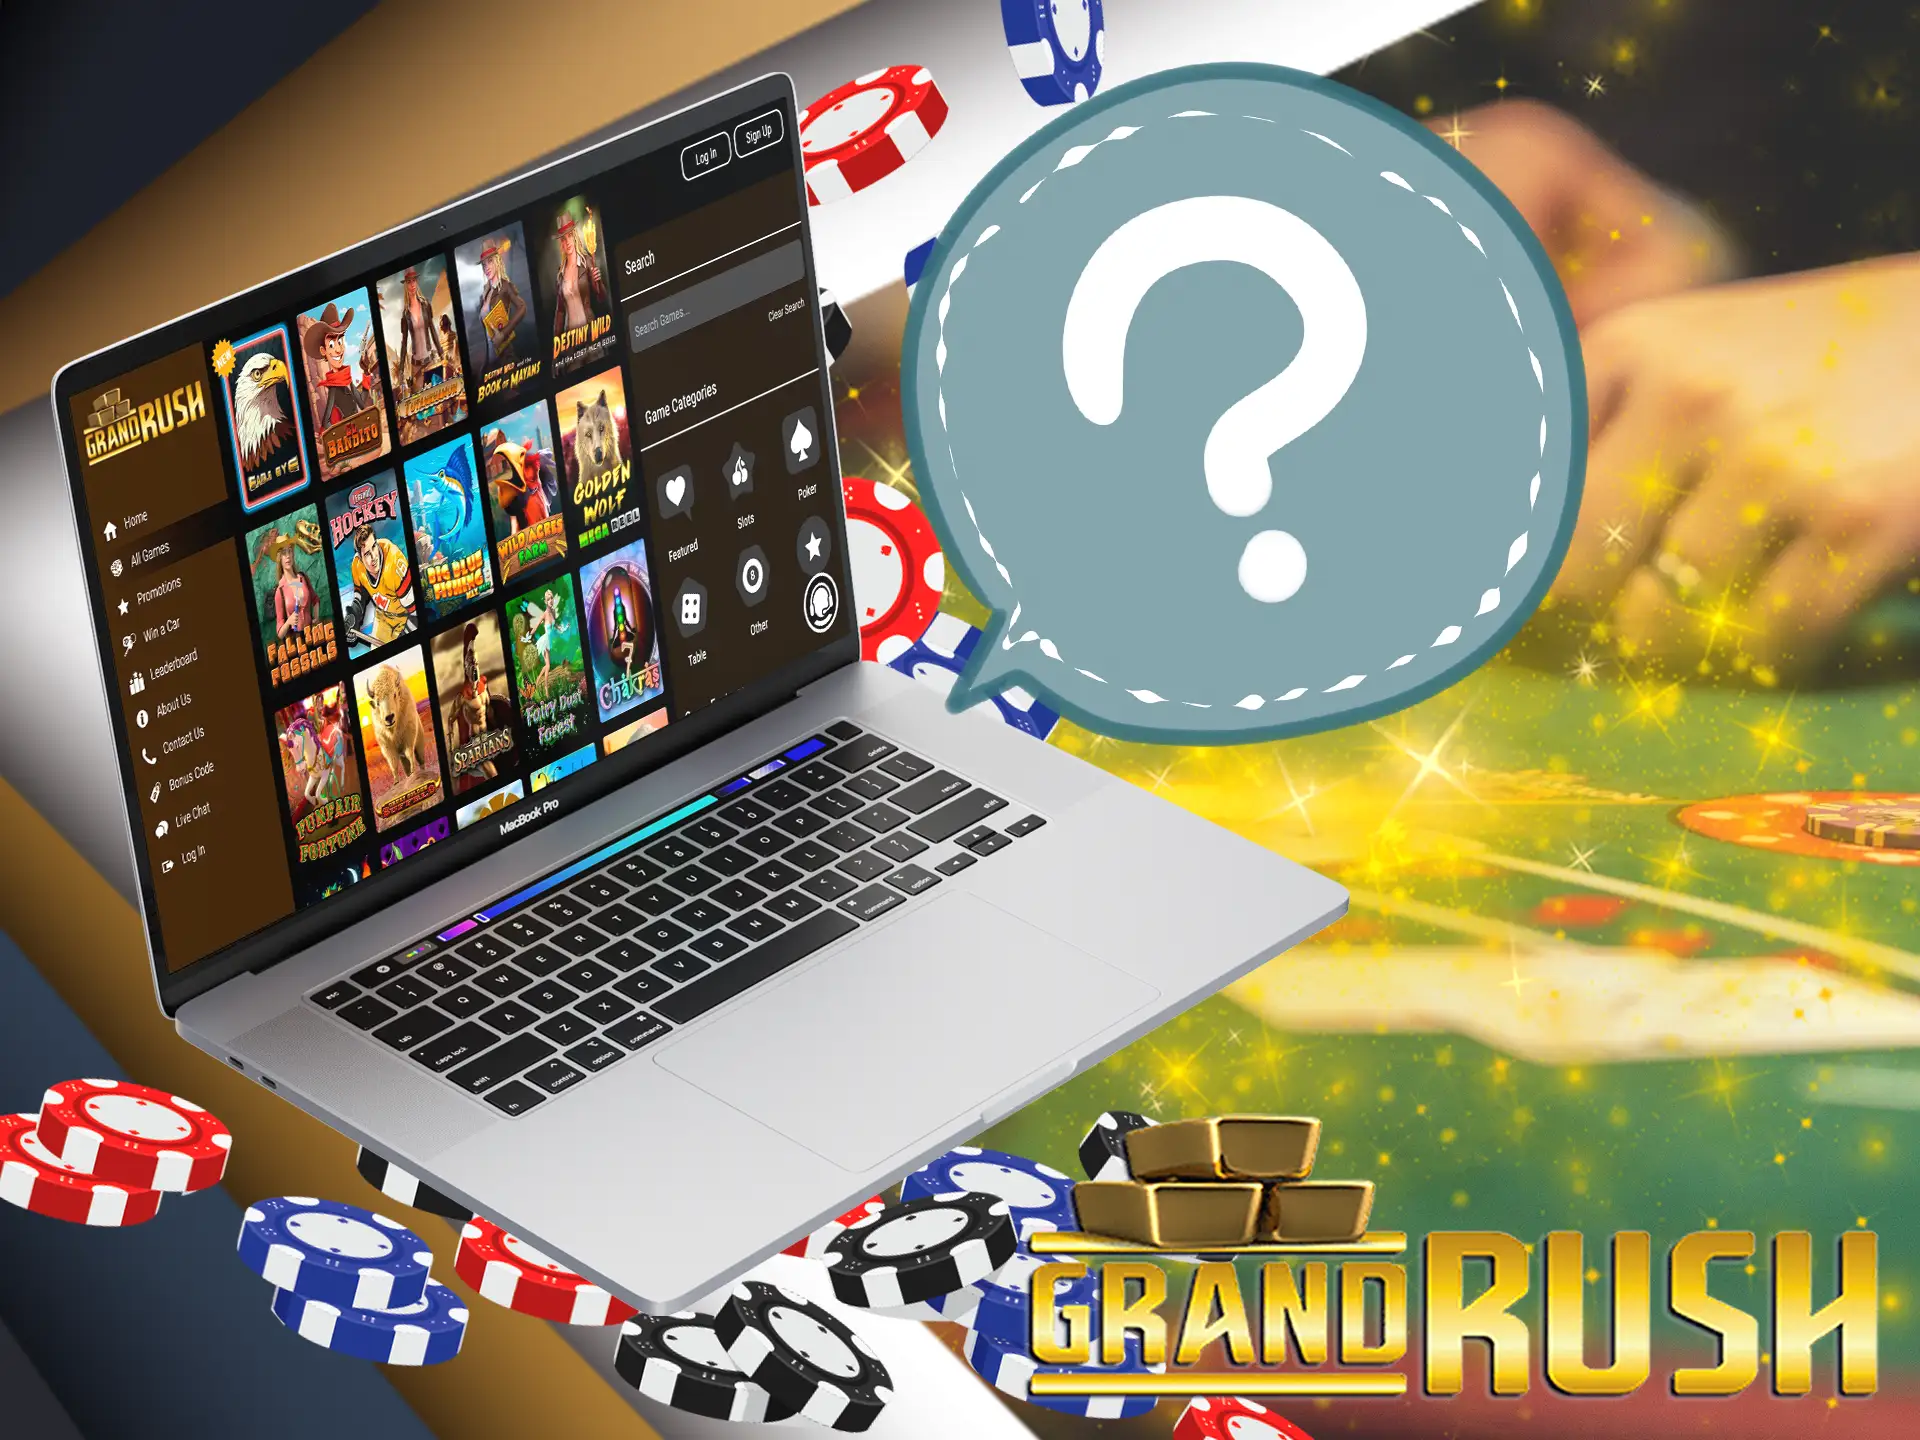 To start playing at Grand Rush log in to your account and choose the casino category.